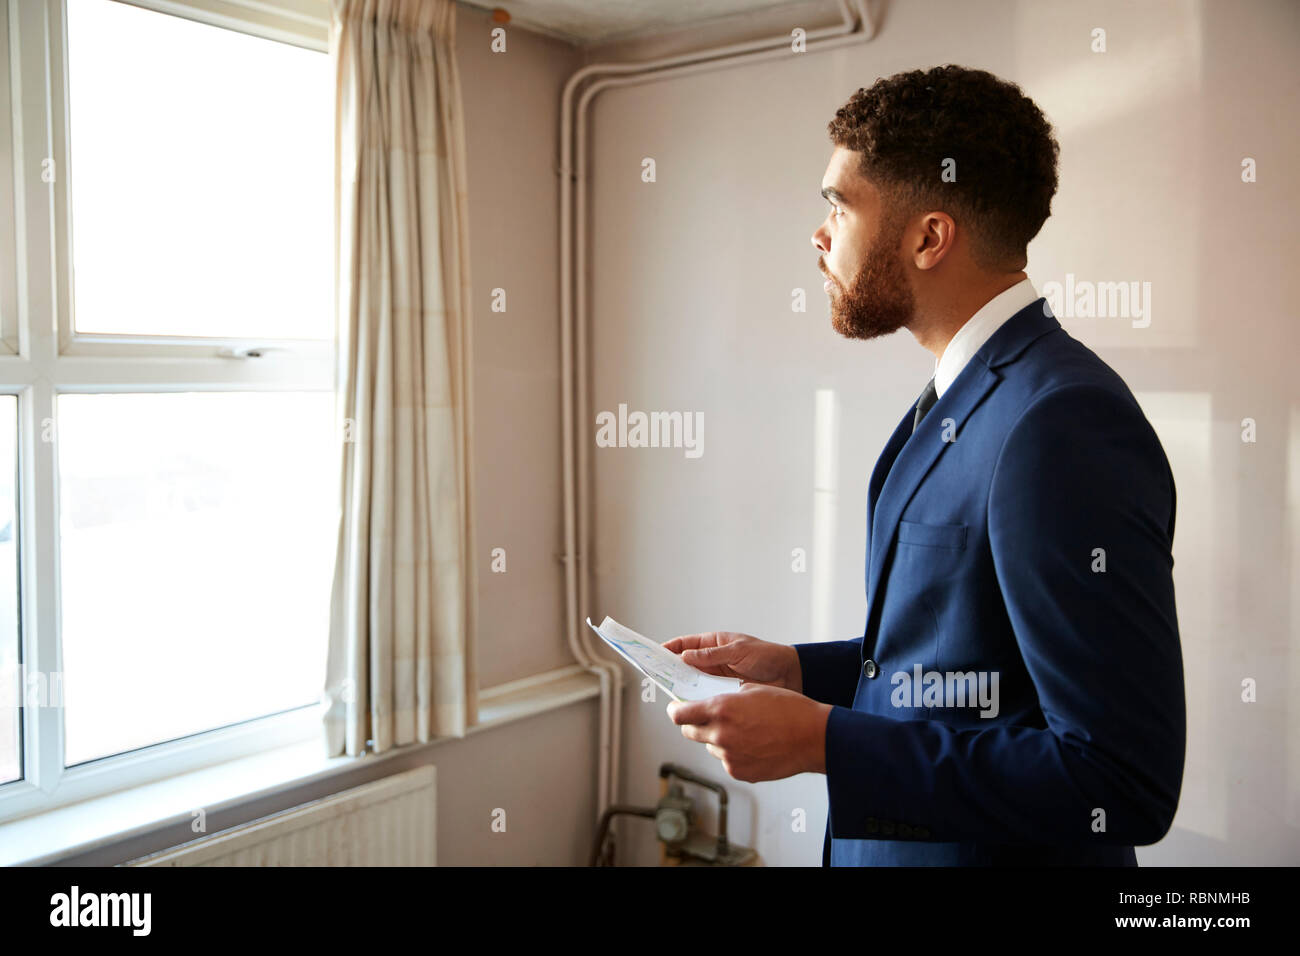 Male Realtor Looking At House Details In Property For Renovation Stock Photo